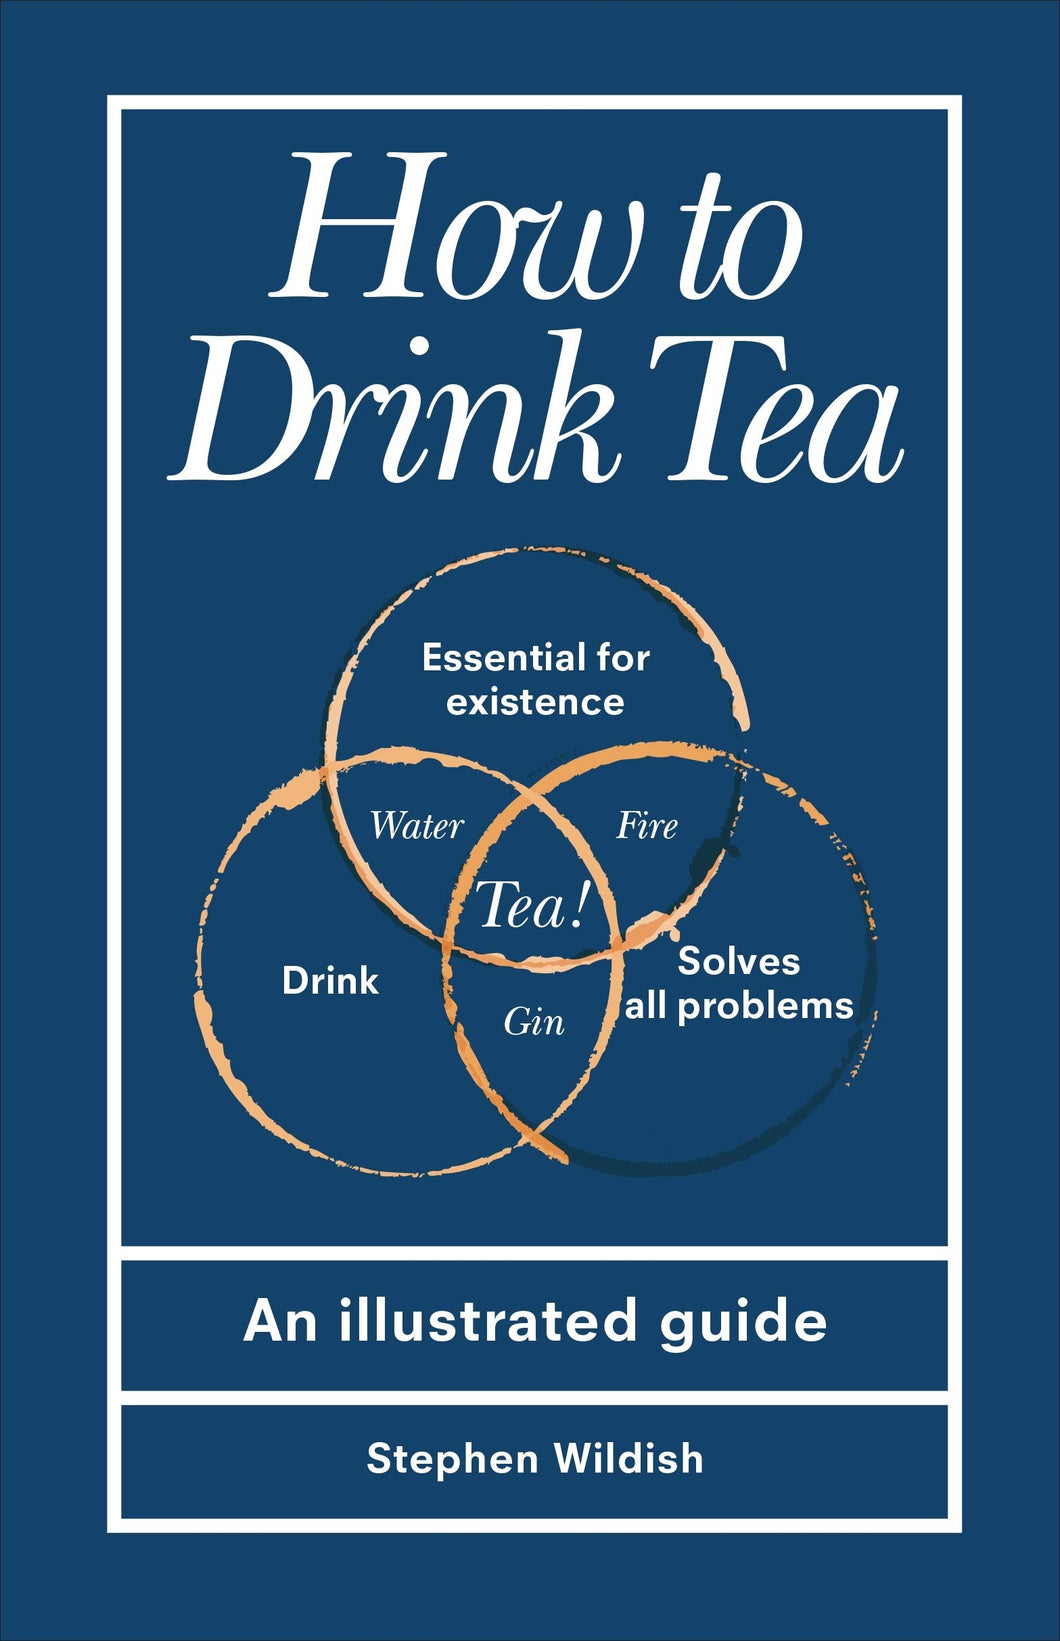 How to Drink Tea by Stephen Wildish